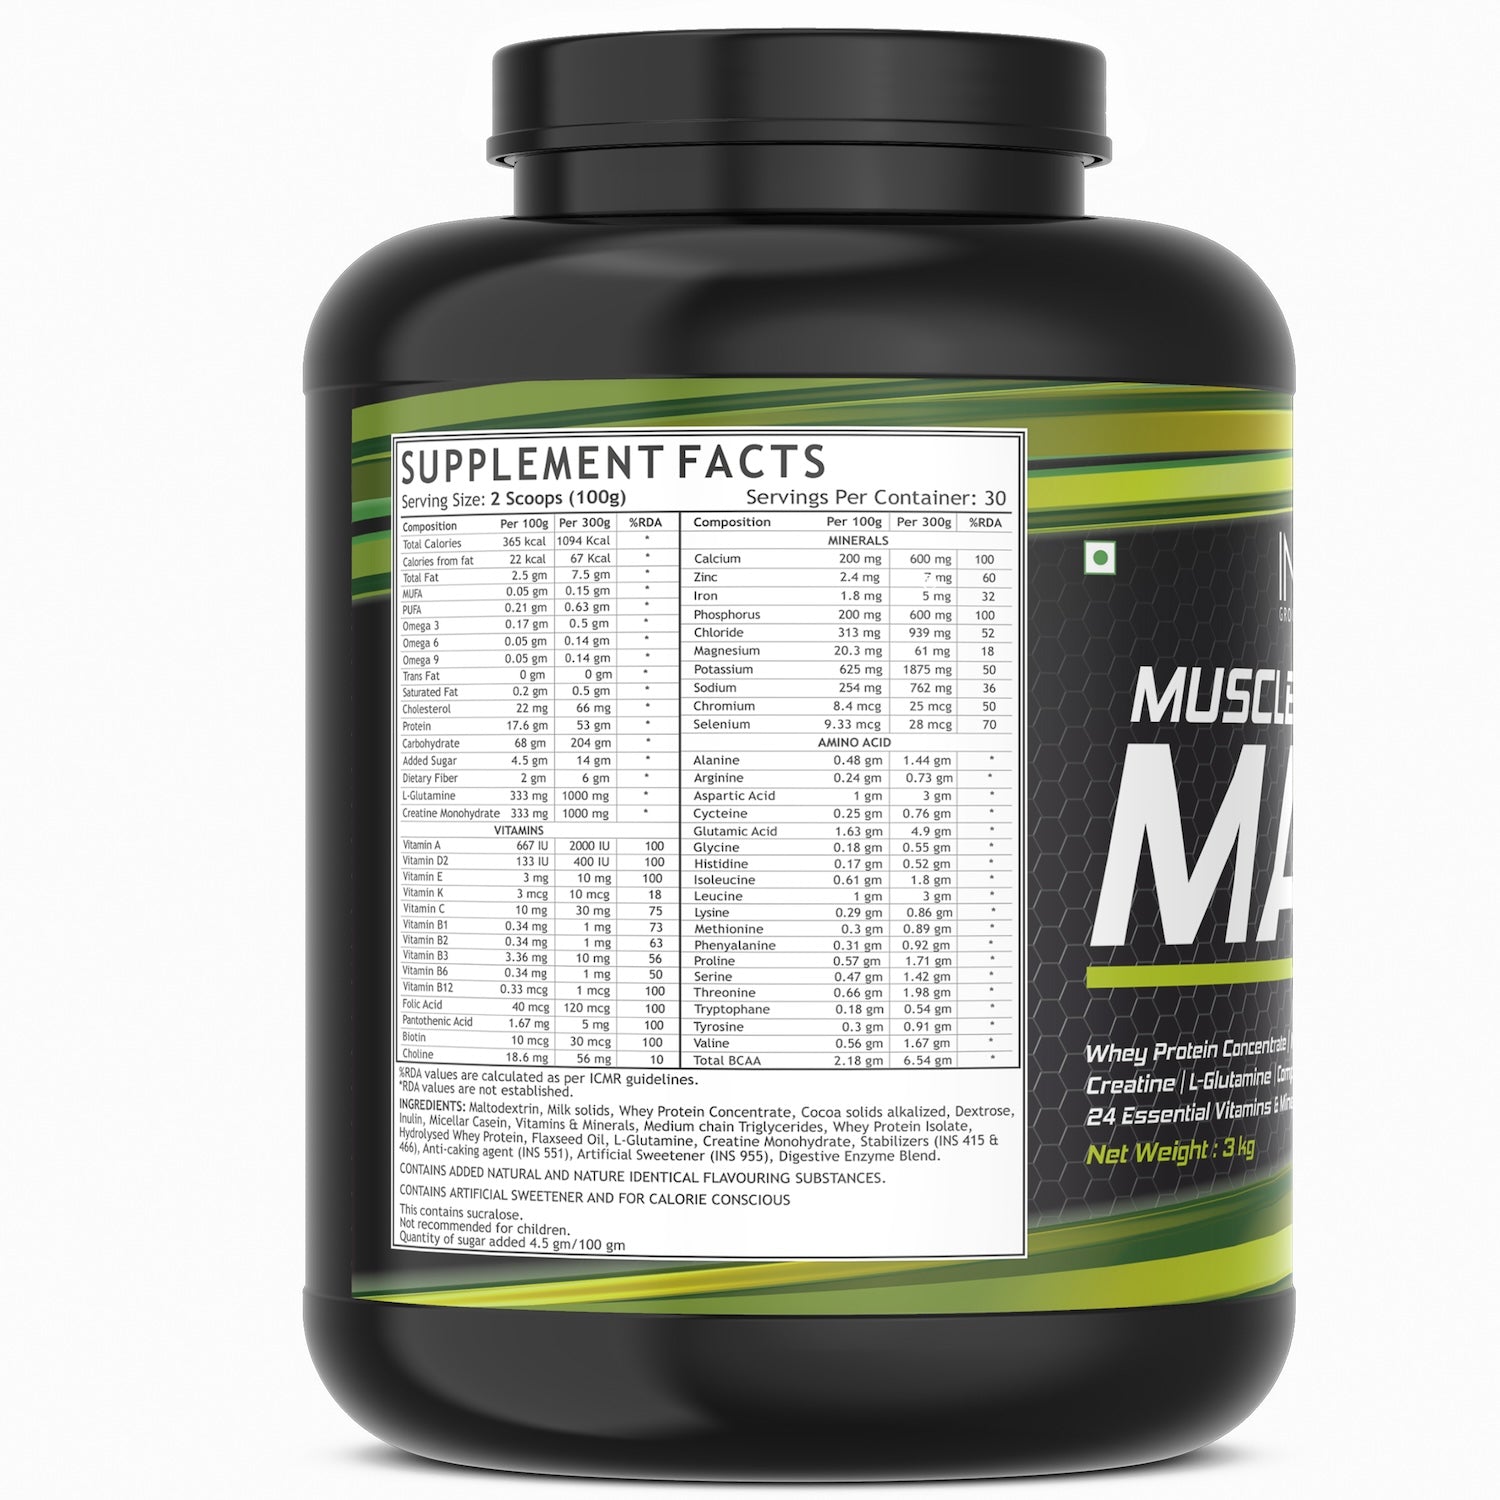 INLIFE Muscle Mass Gainer, Bodybuilding Protein Powder Supplement - Inlife Pharma Private Limited